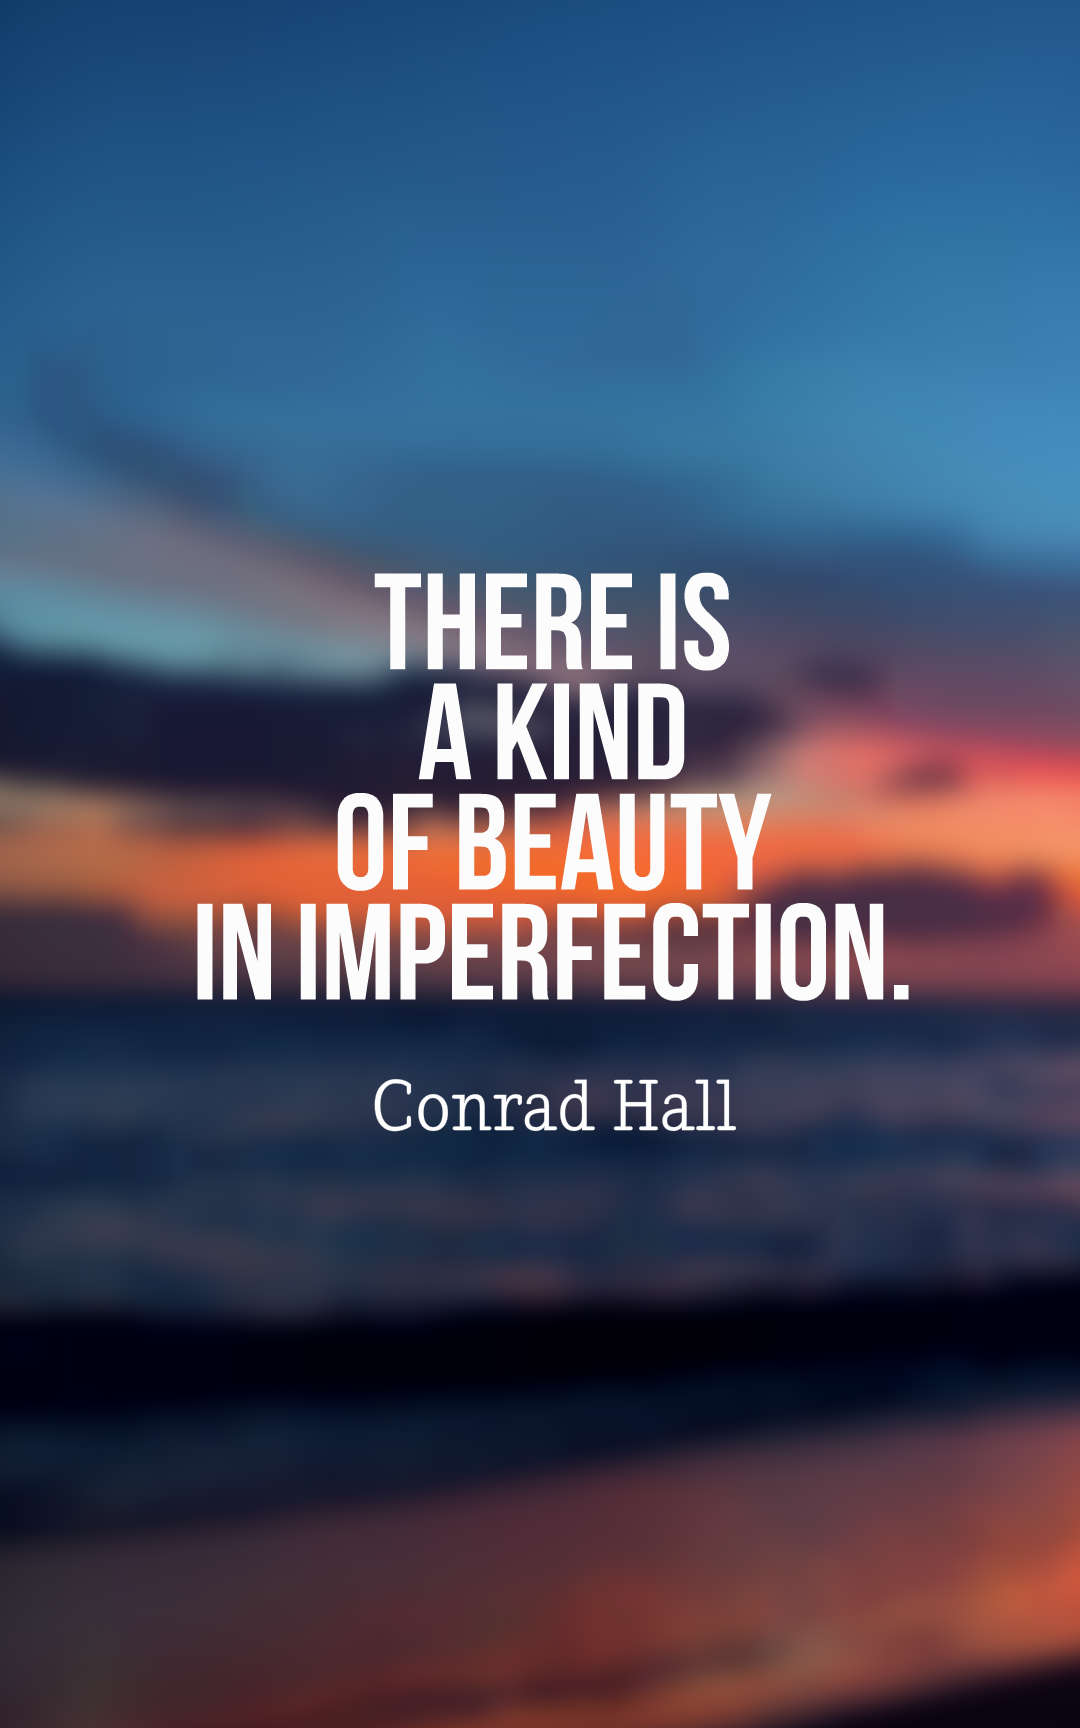 There is a kind of beauty in imperfection.